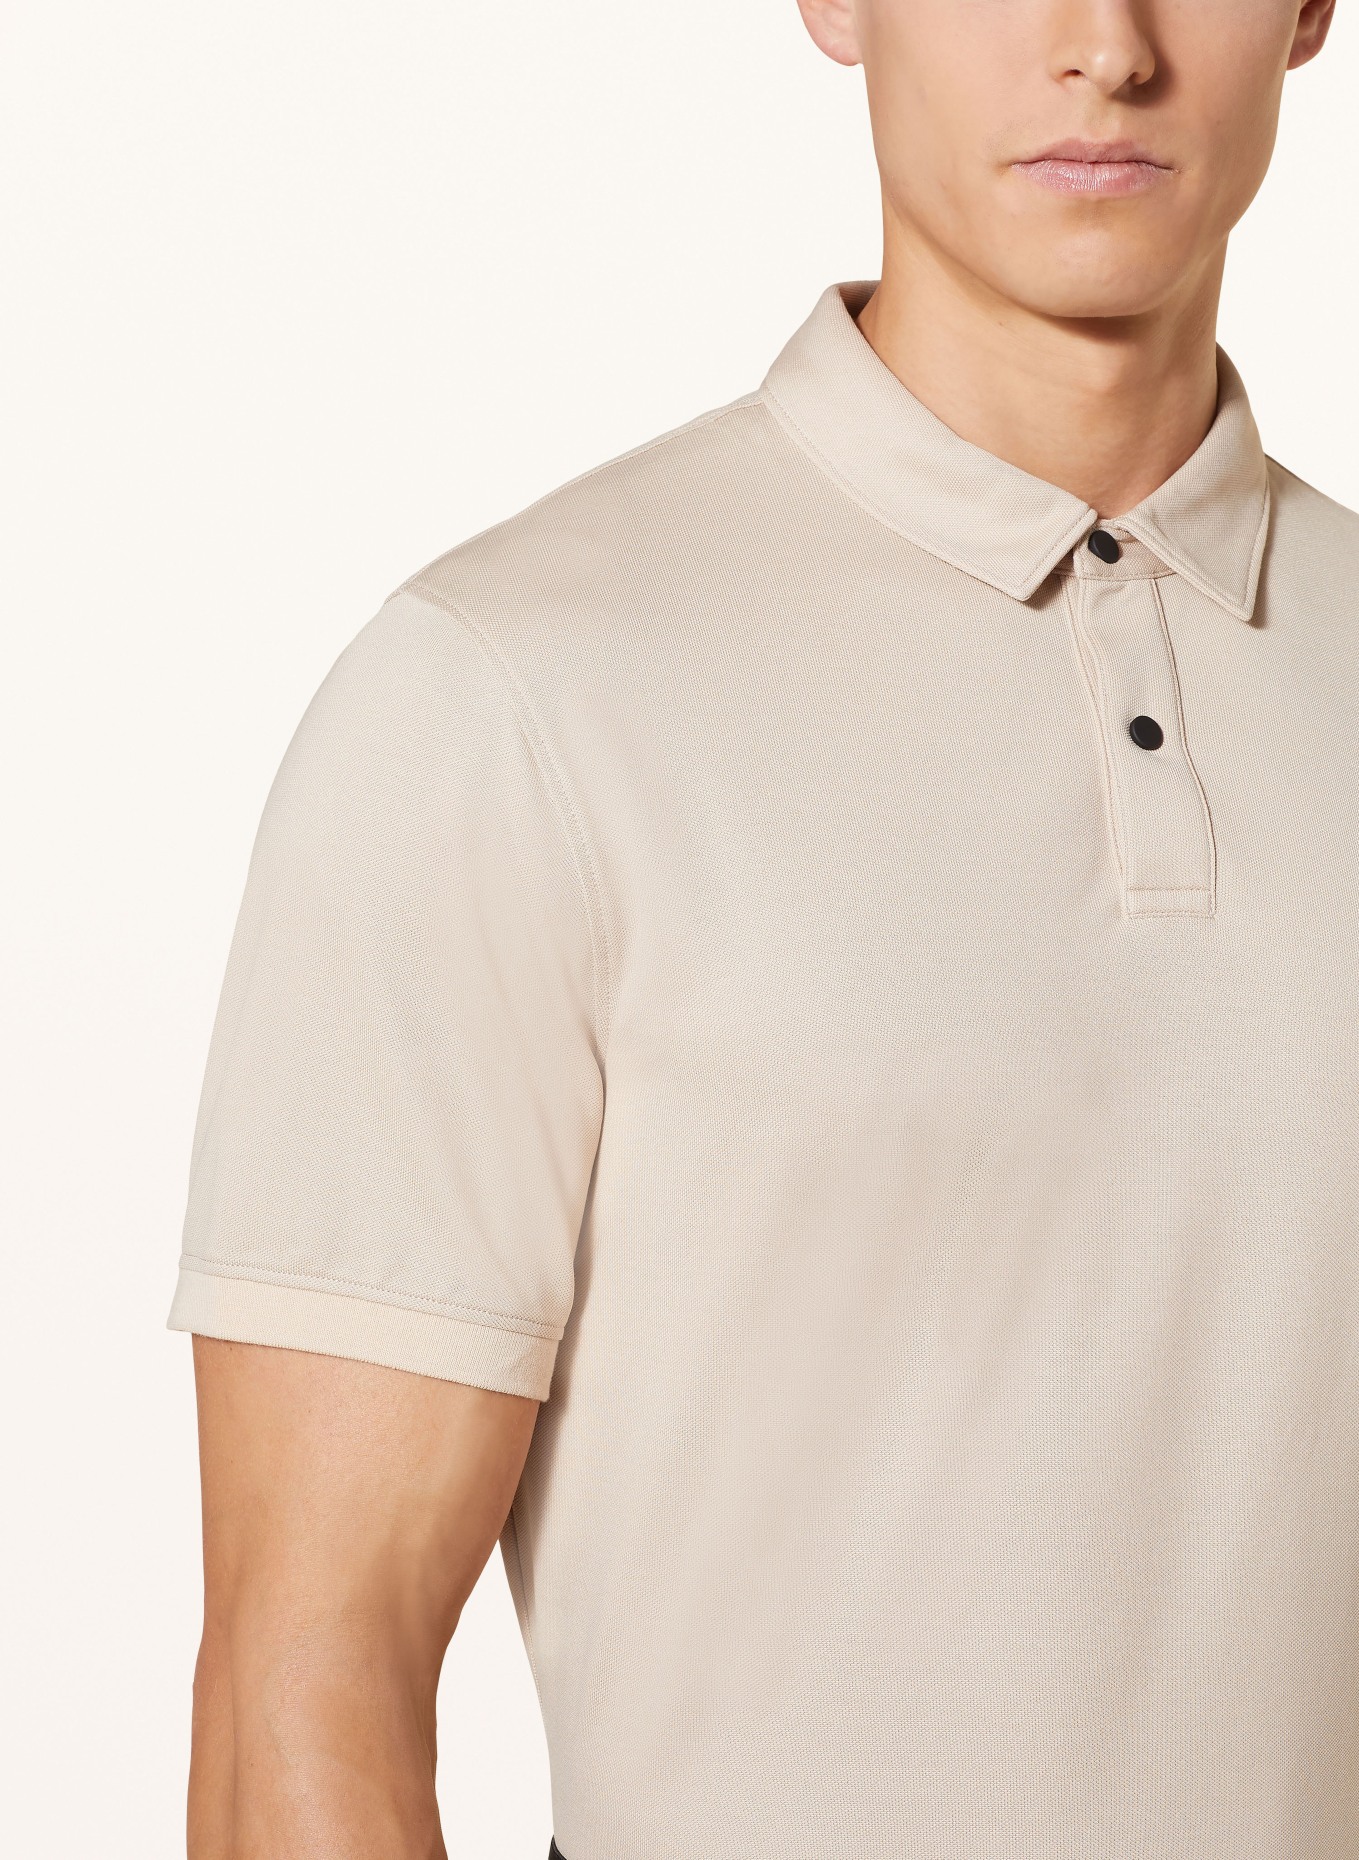 BOGNER Performance polo shirt TIMO, Color: BEIGE (Image 4)